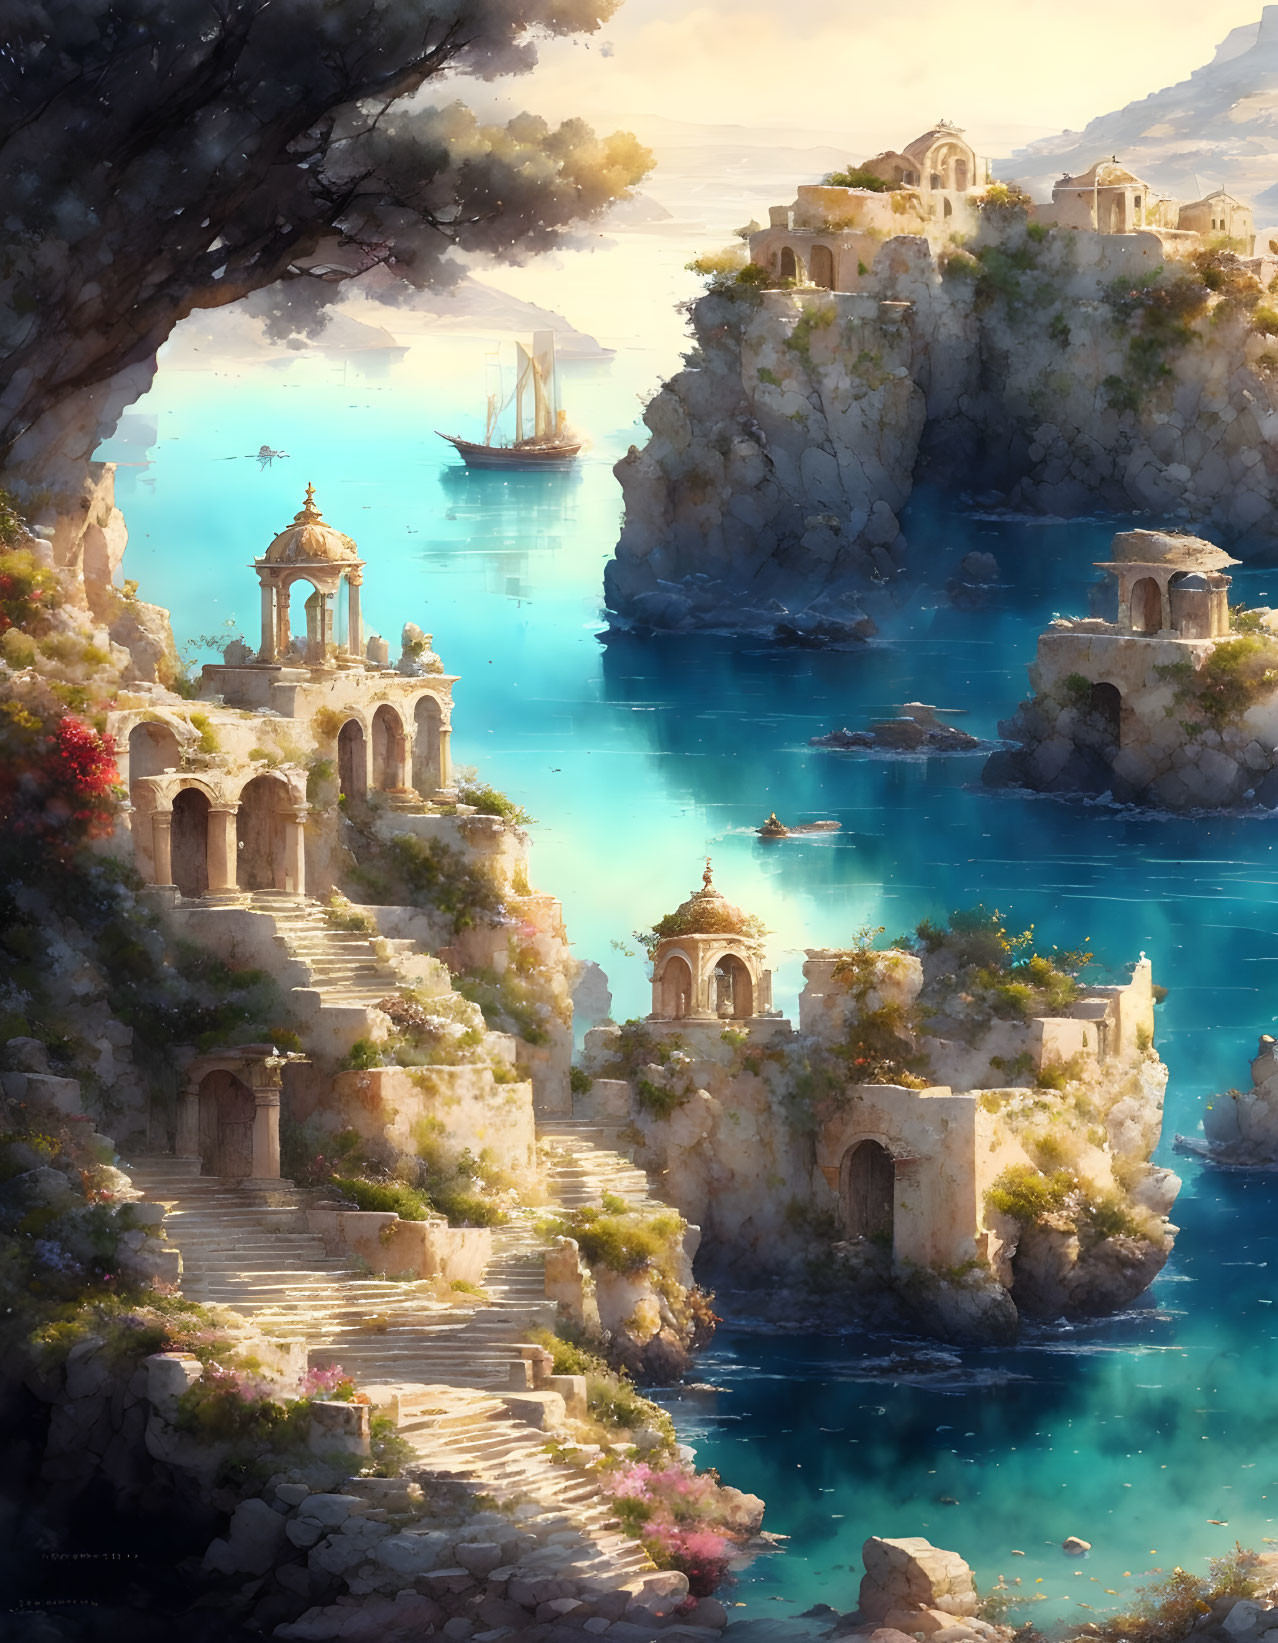 Tranquil seascape with ancient ruins, stone staircases, flowering shrubs, and boats on